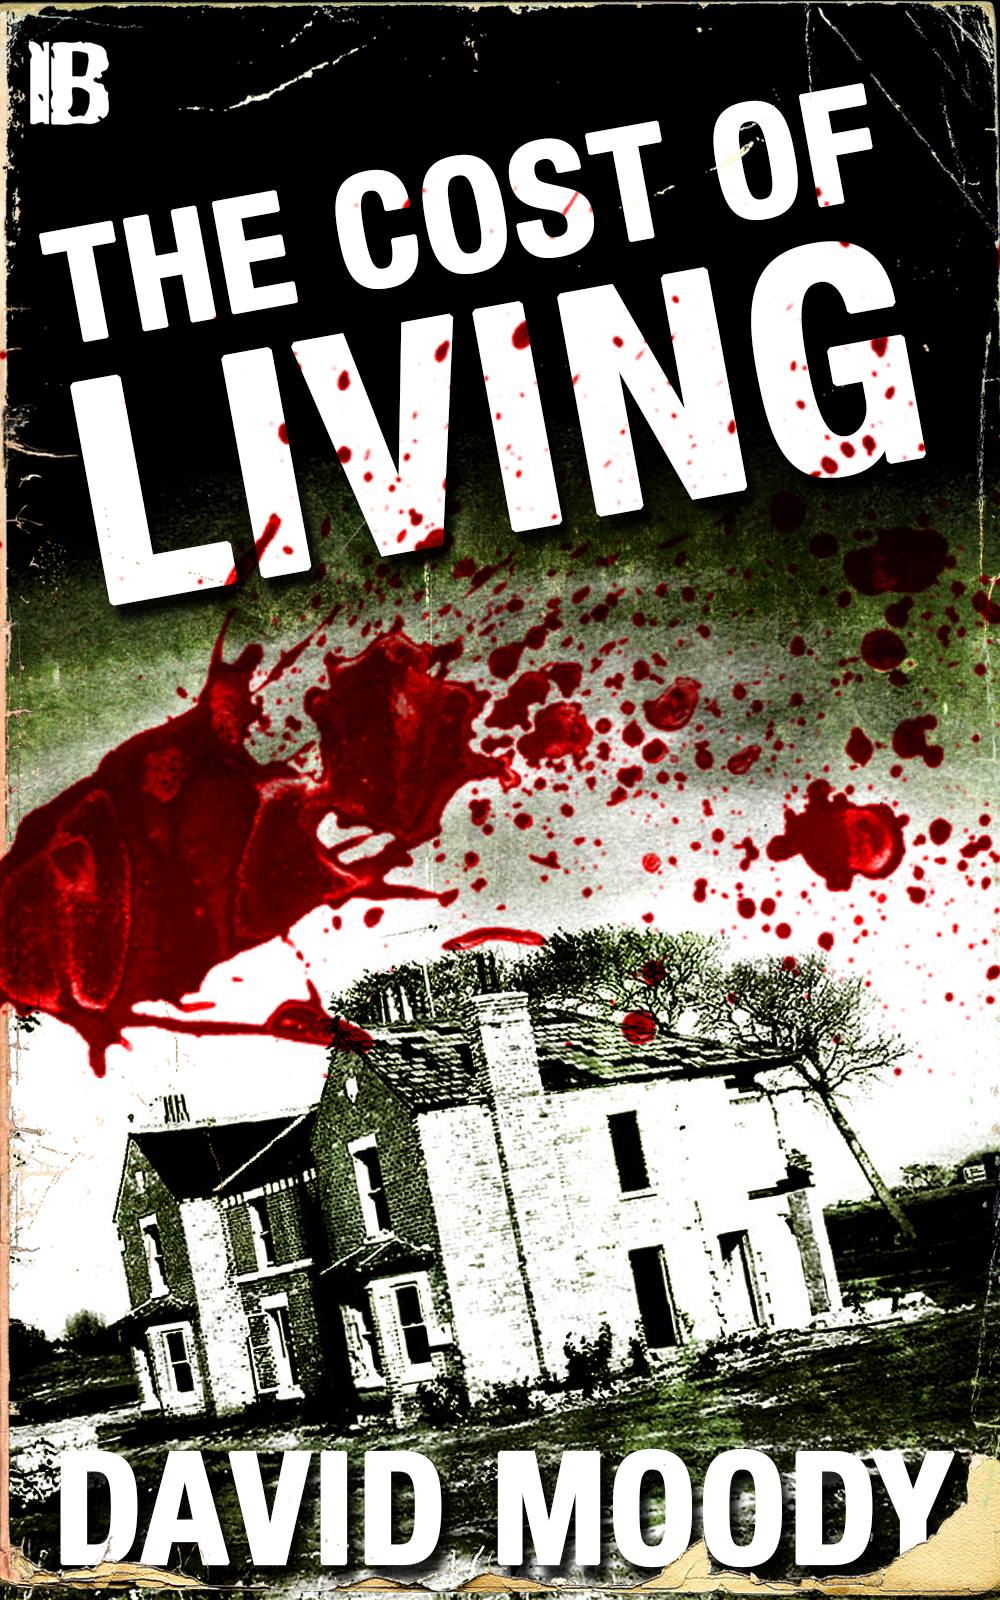 The Cost of Living by David Moody (Infected Books 2014)